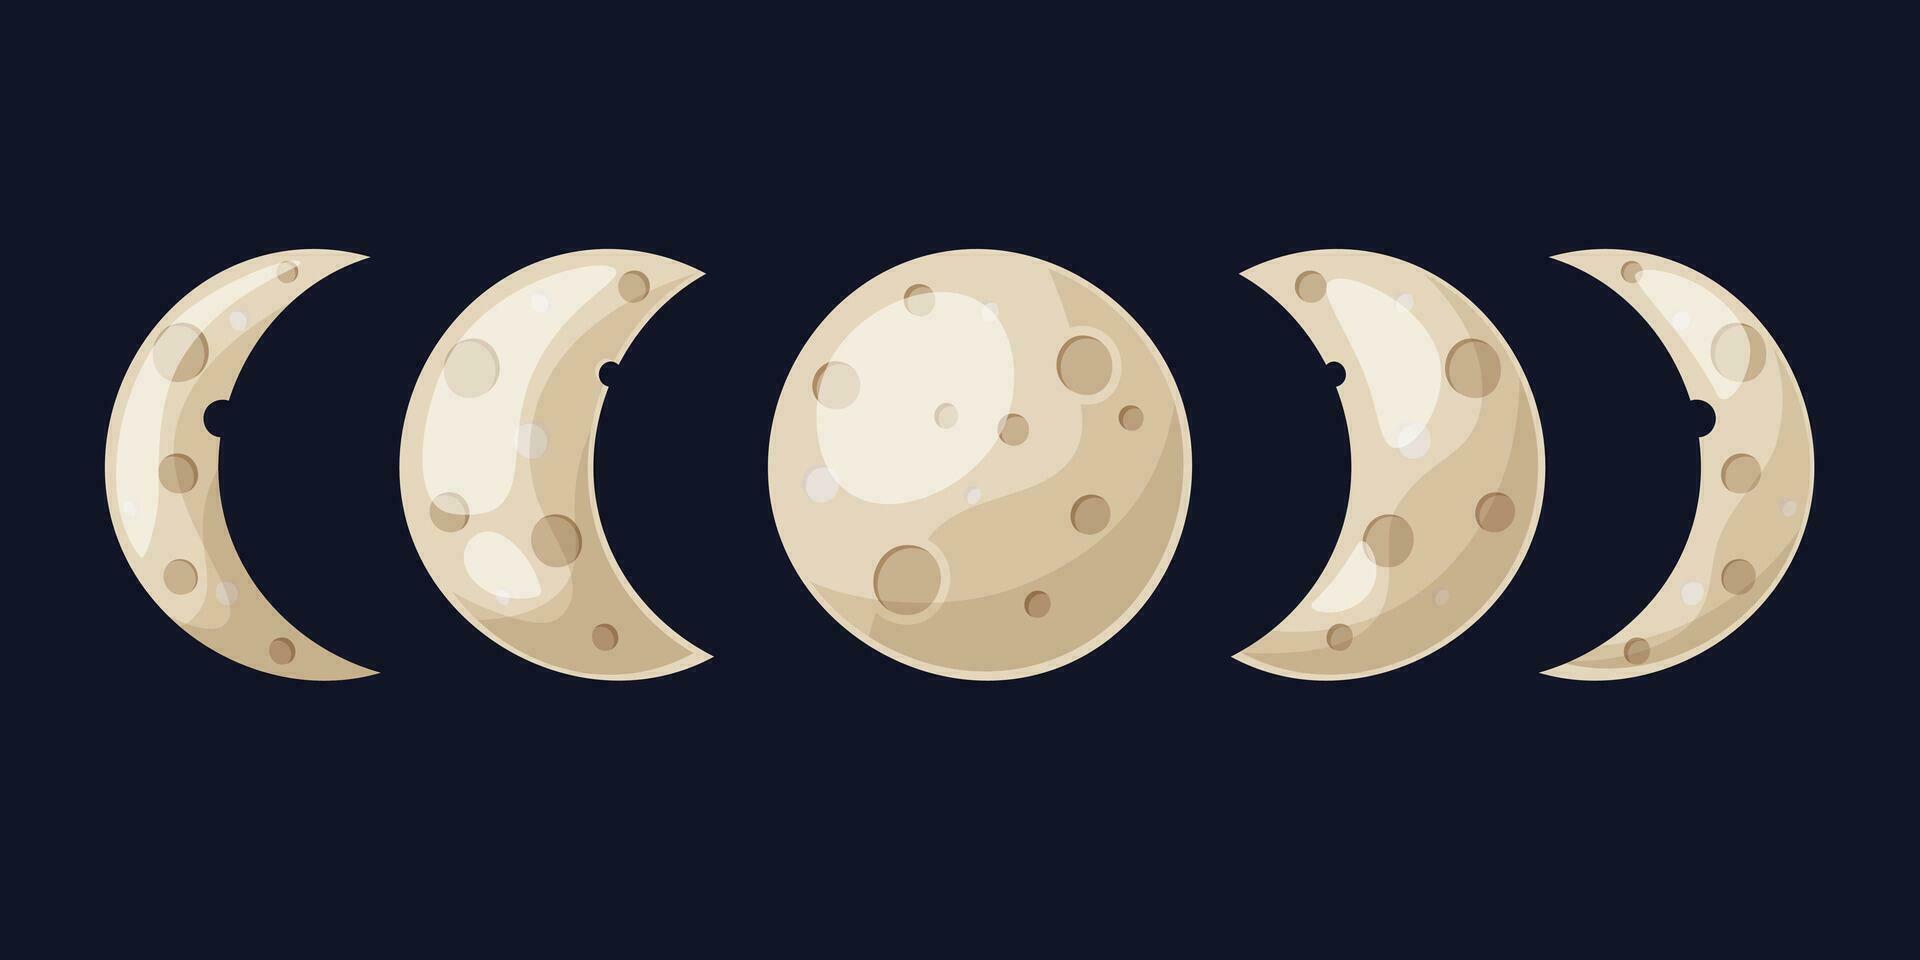 Phases of the moon, waxing or waning crescent on a dark background. Lunar eclipse in stages. vector illustration of the moon in cartoon, flat style.